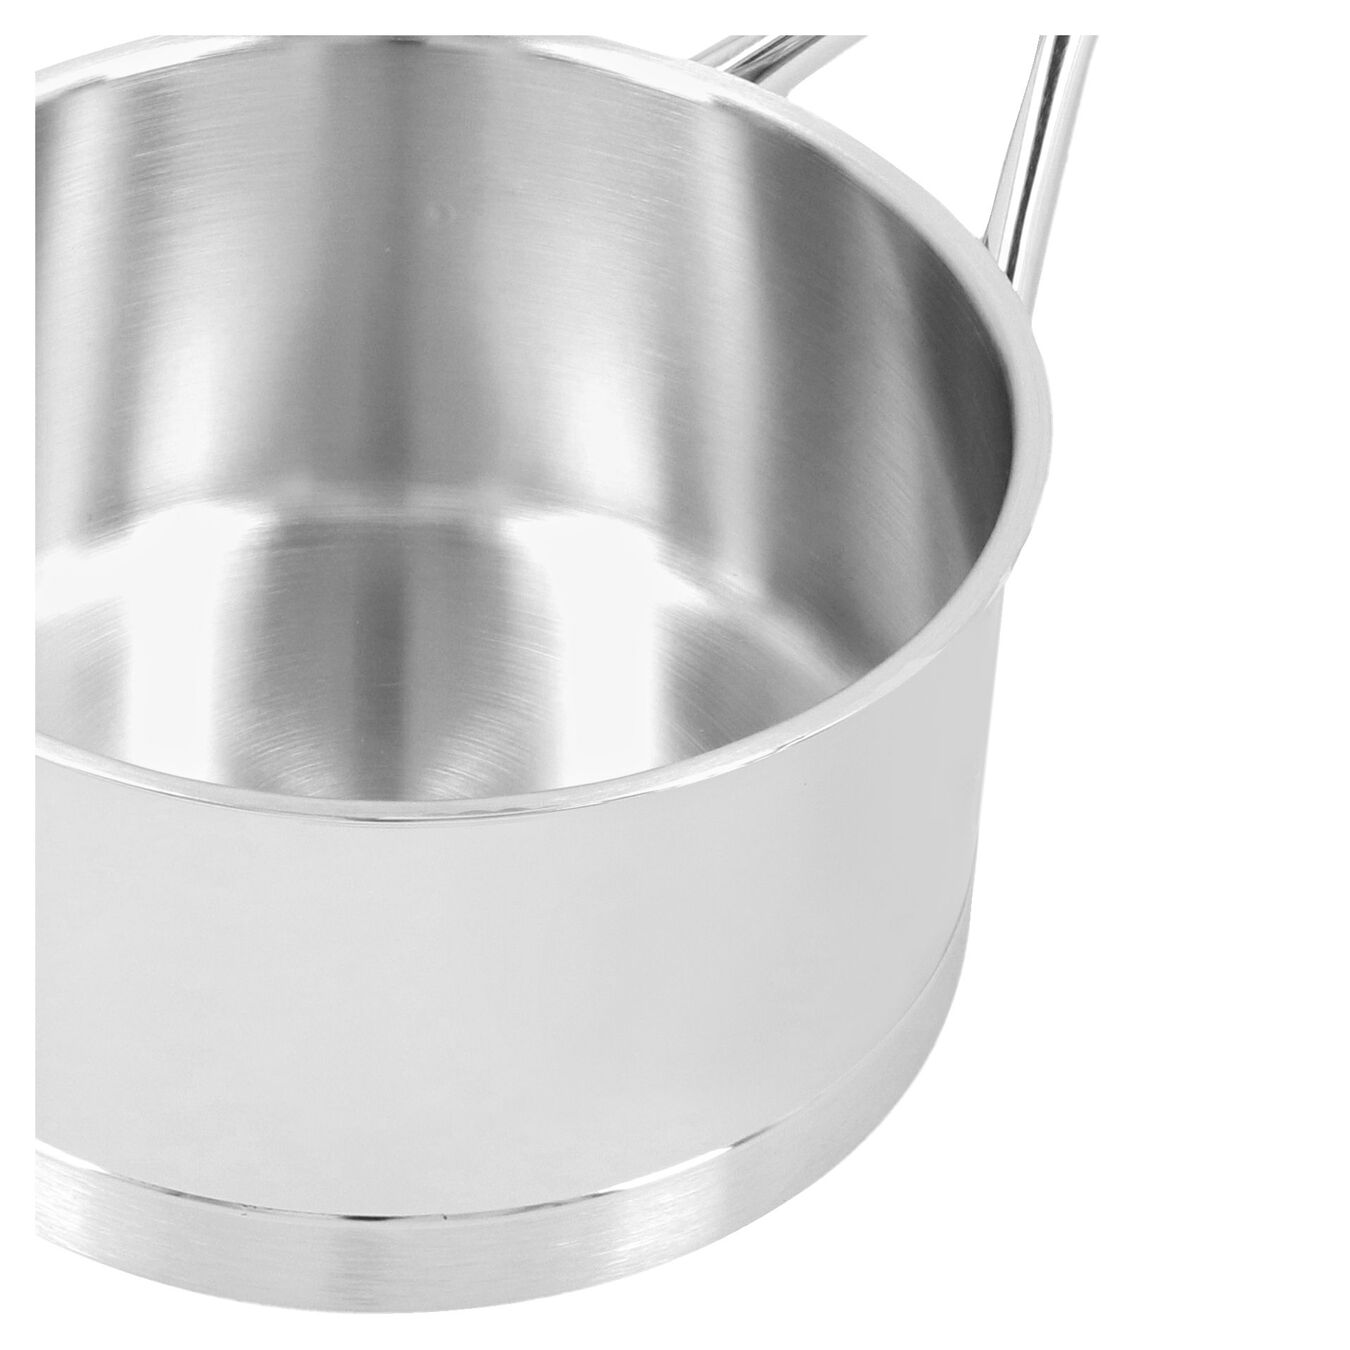 14 cm Stainless steel Saucepan with lid silver,,large 5